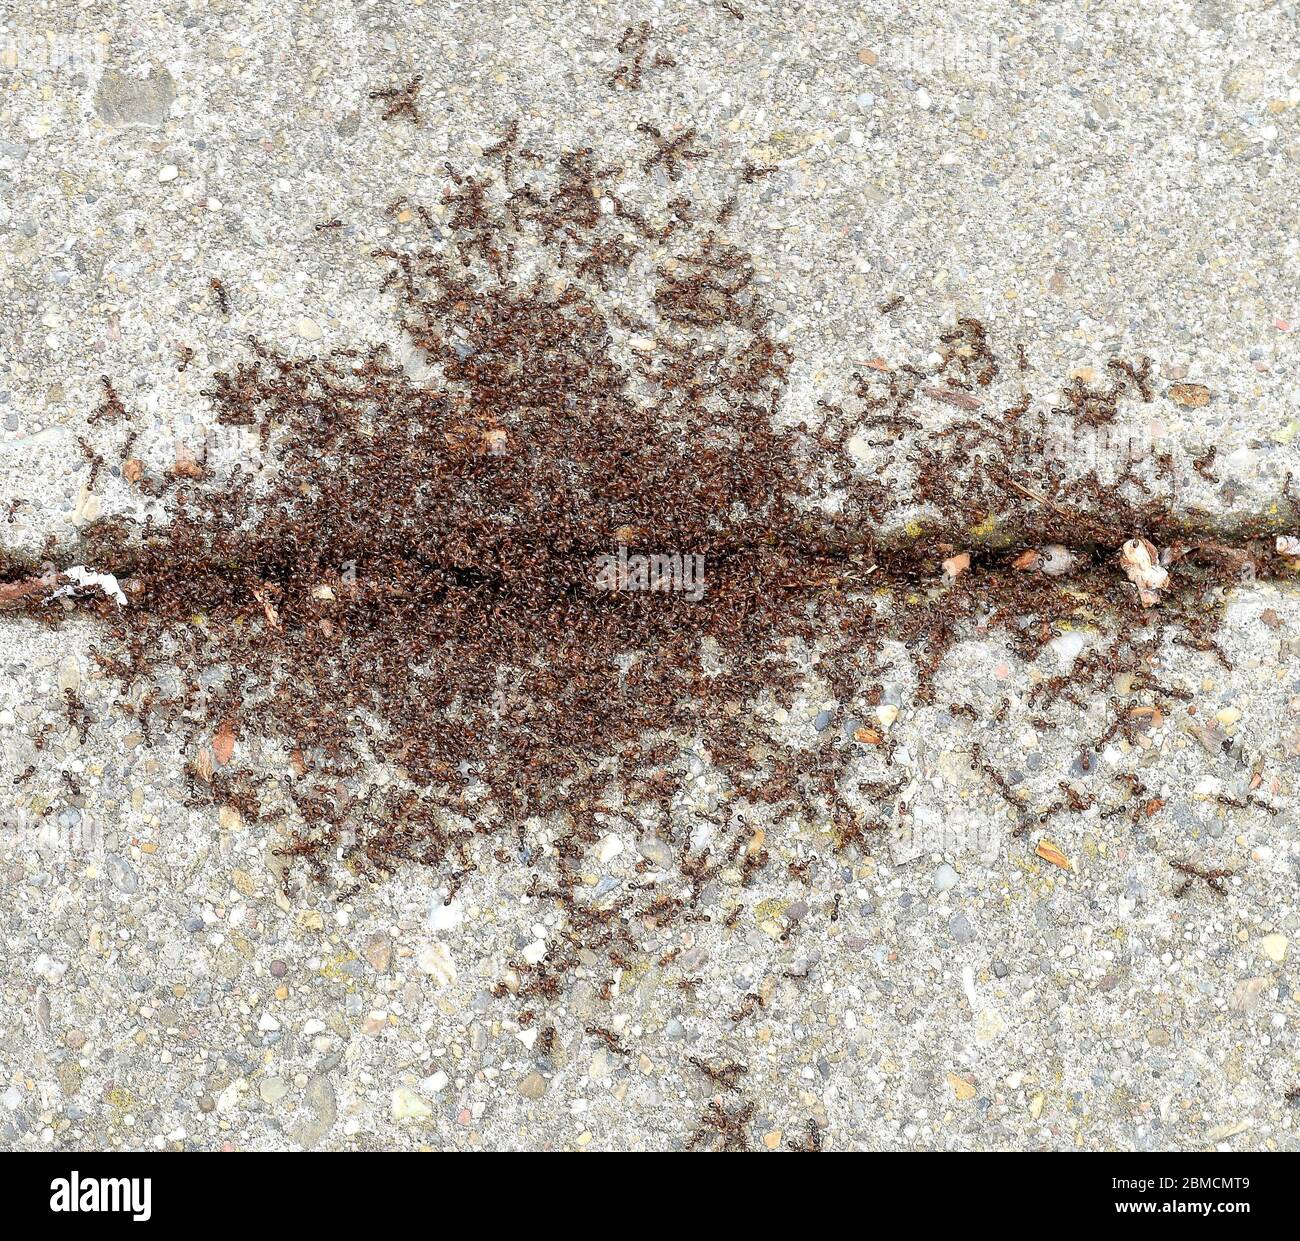 ants swarm on a sidewalk in Union City California in March Stock Photo